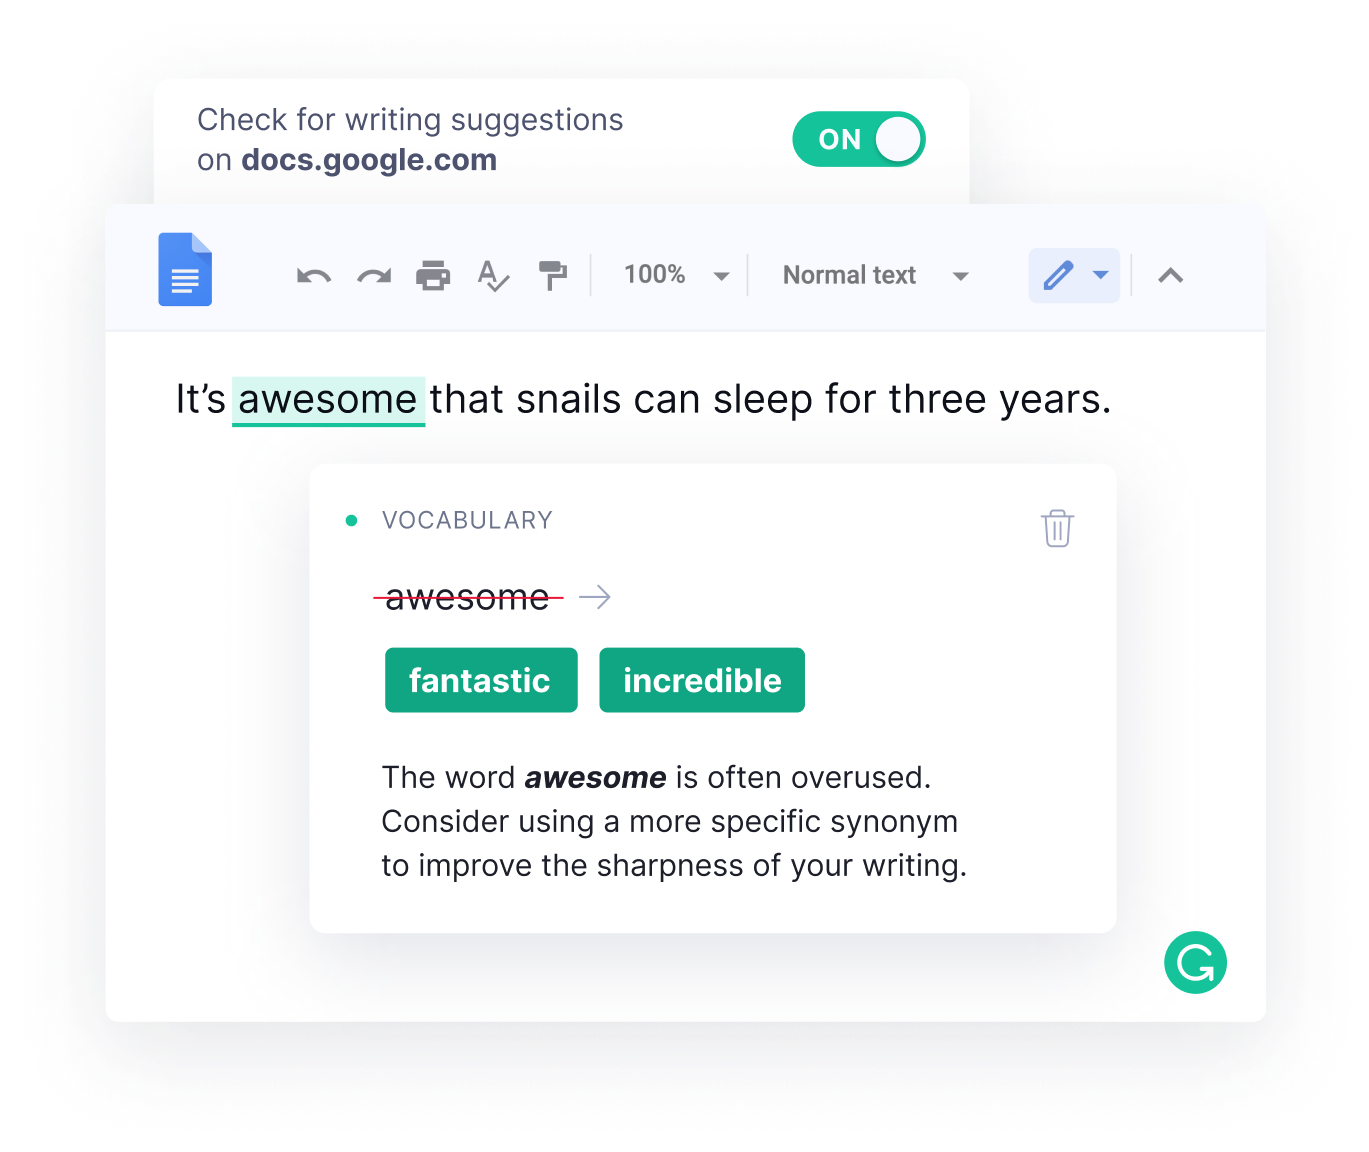 Write clearly and mistake-free in Google Docs with Grammarly's real-time, AI-powered writing assistant.